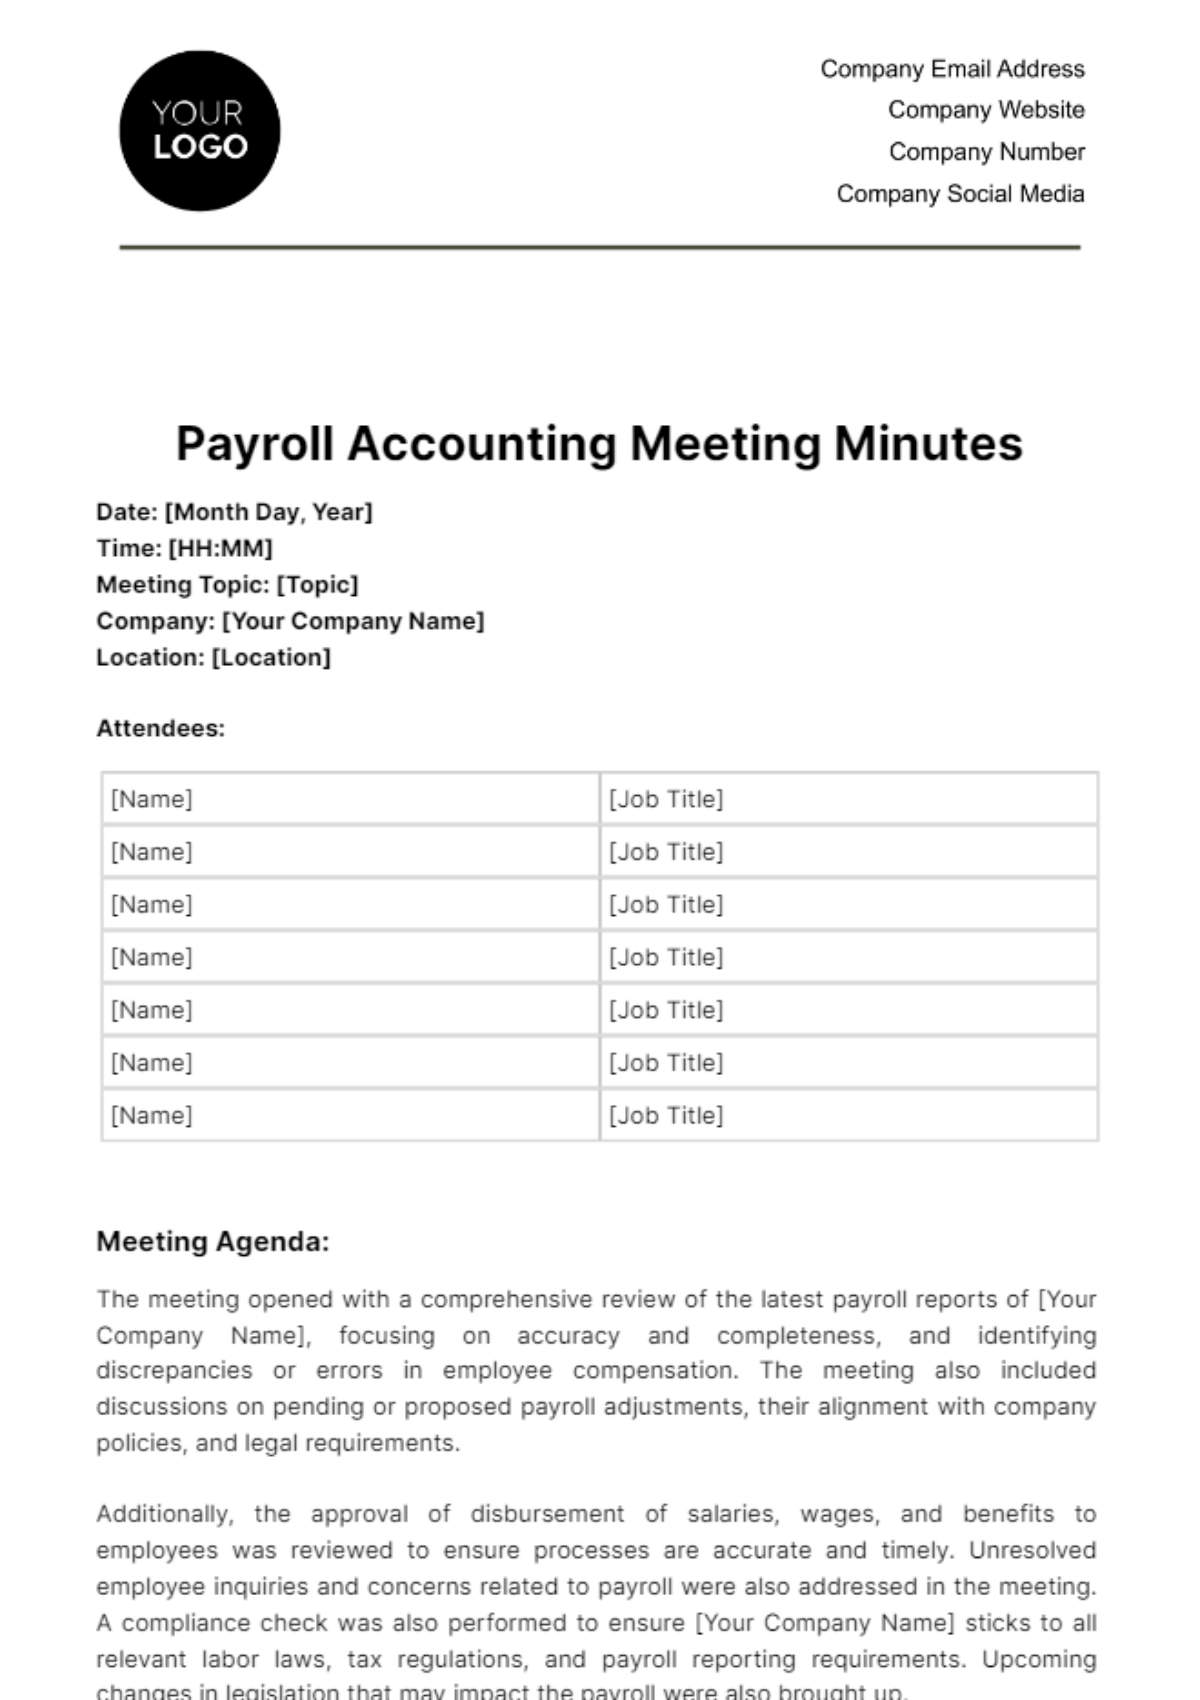 Free Payroll Accounting Meeting Minute Template